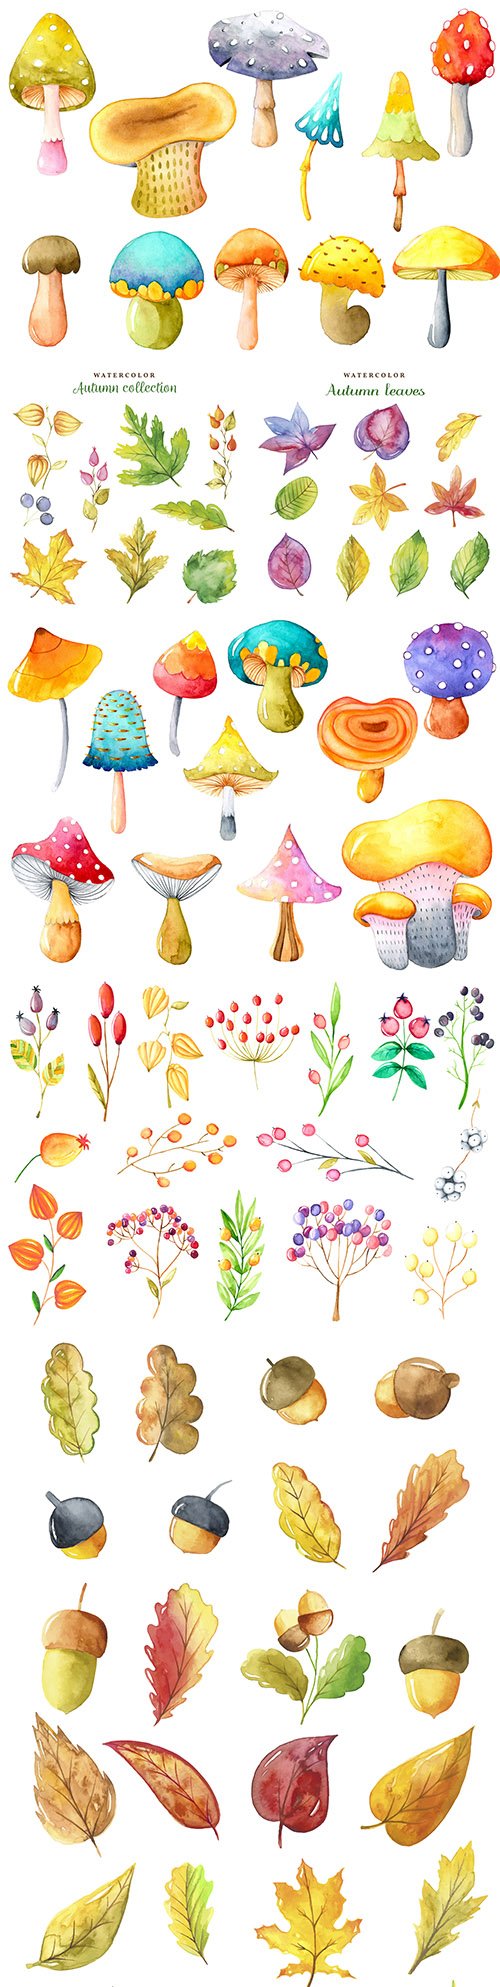 Mushrooms and autumn leaves collection watercolors